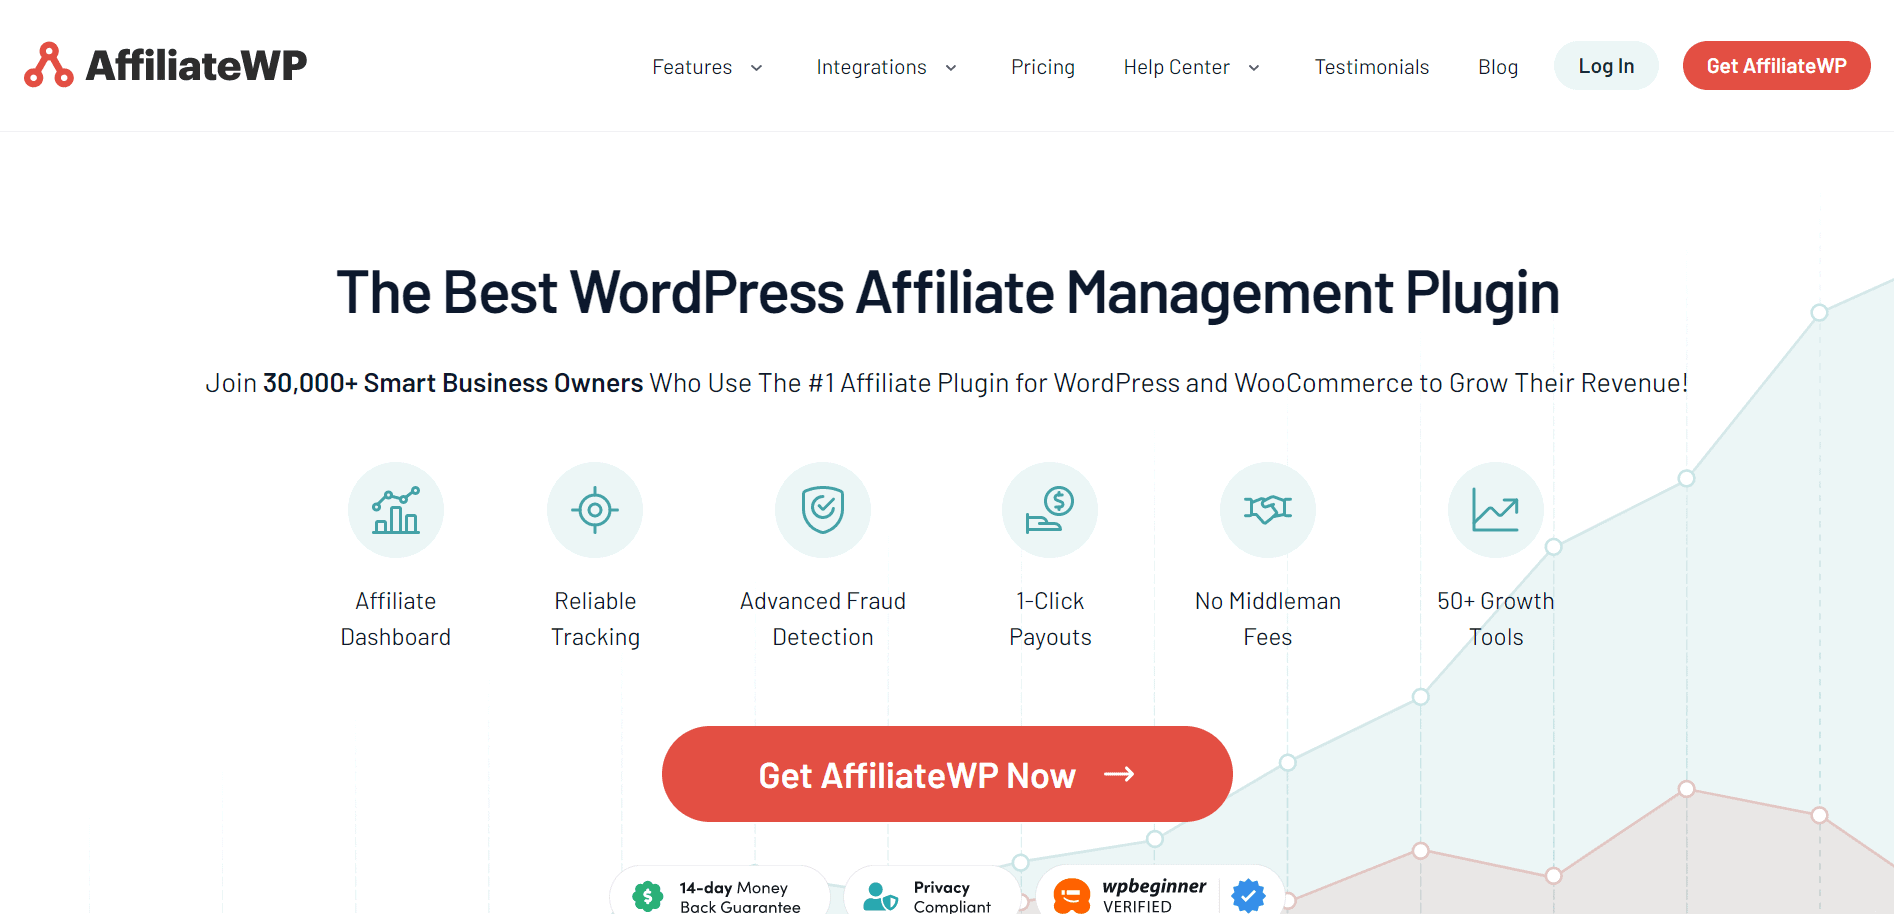 Is AffiliateWP Really Worth It